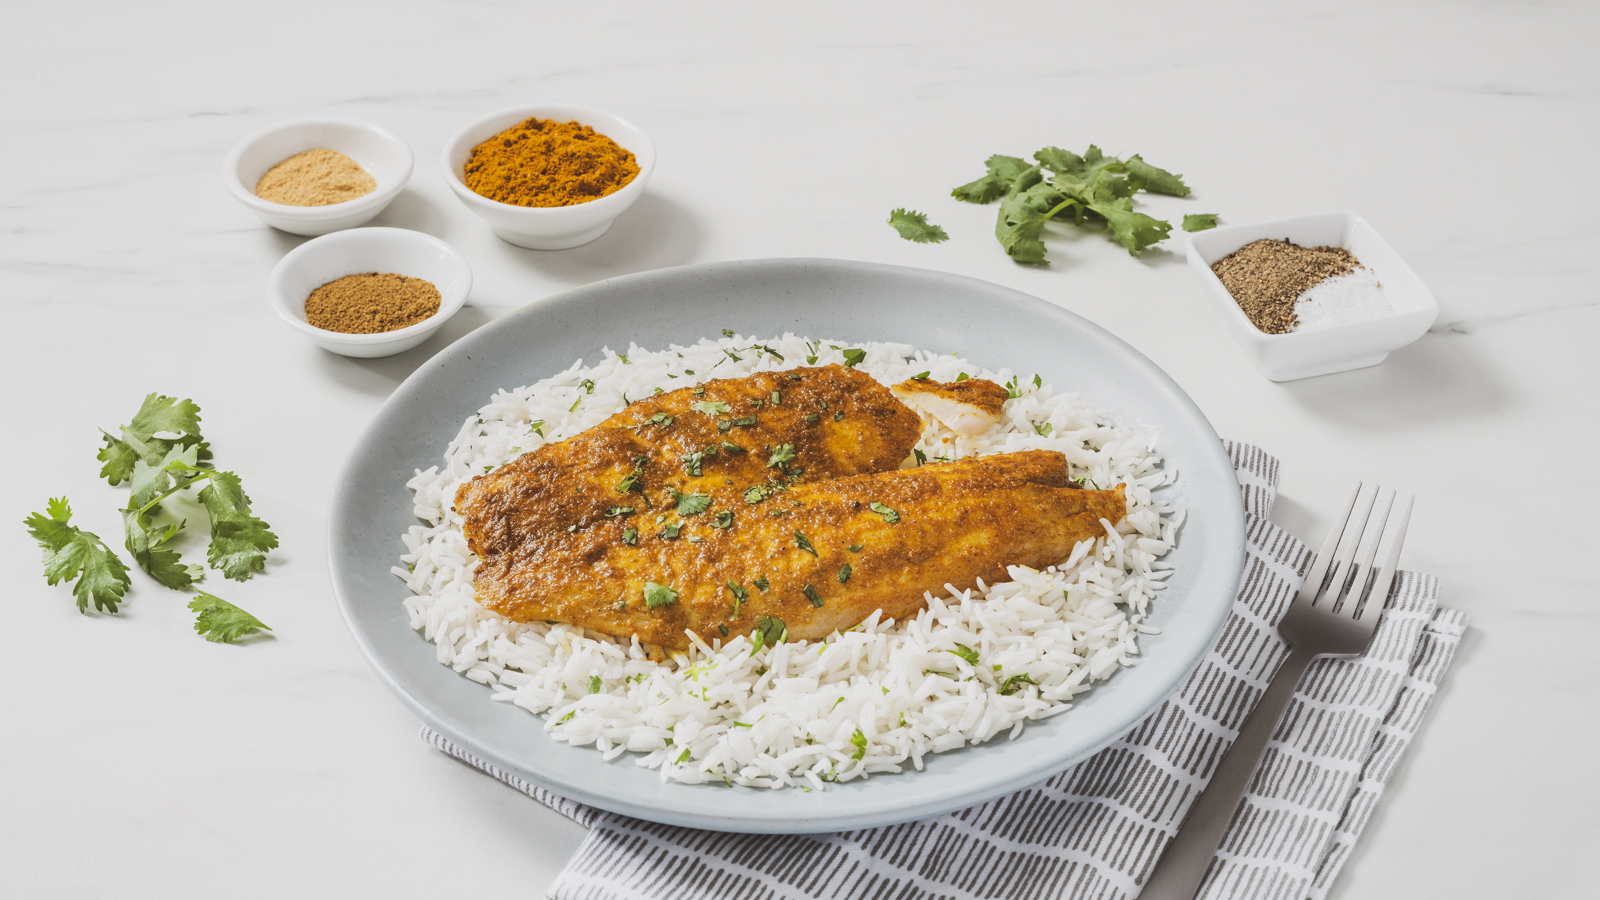 Curry Marinated Baked Fish with Basmati Rice